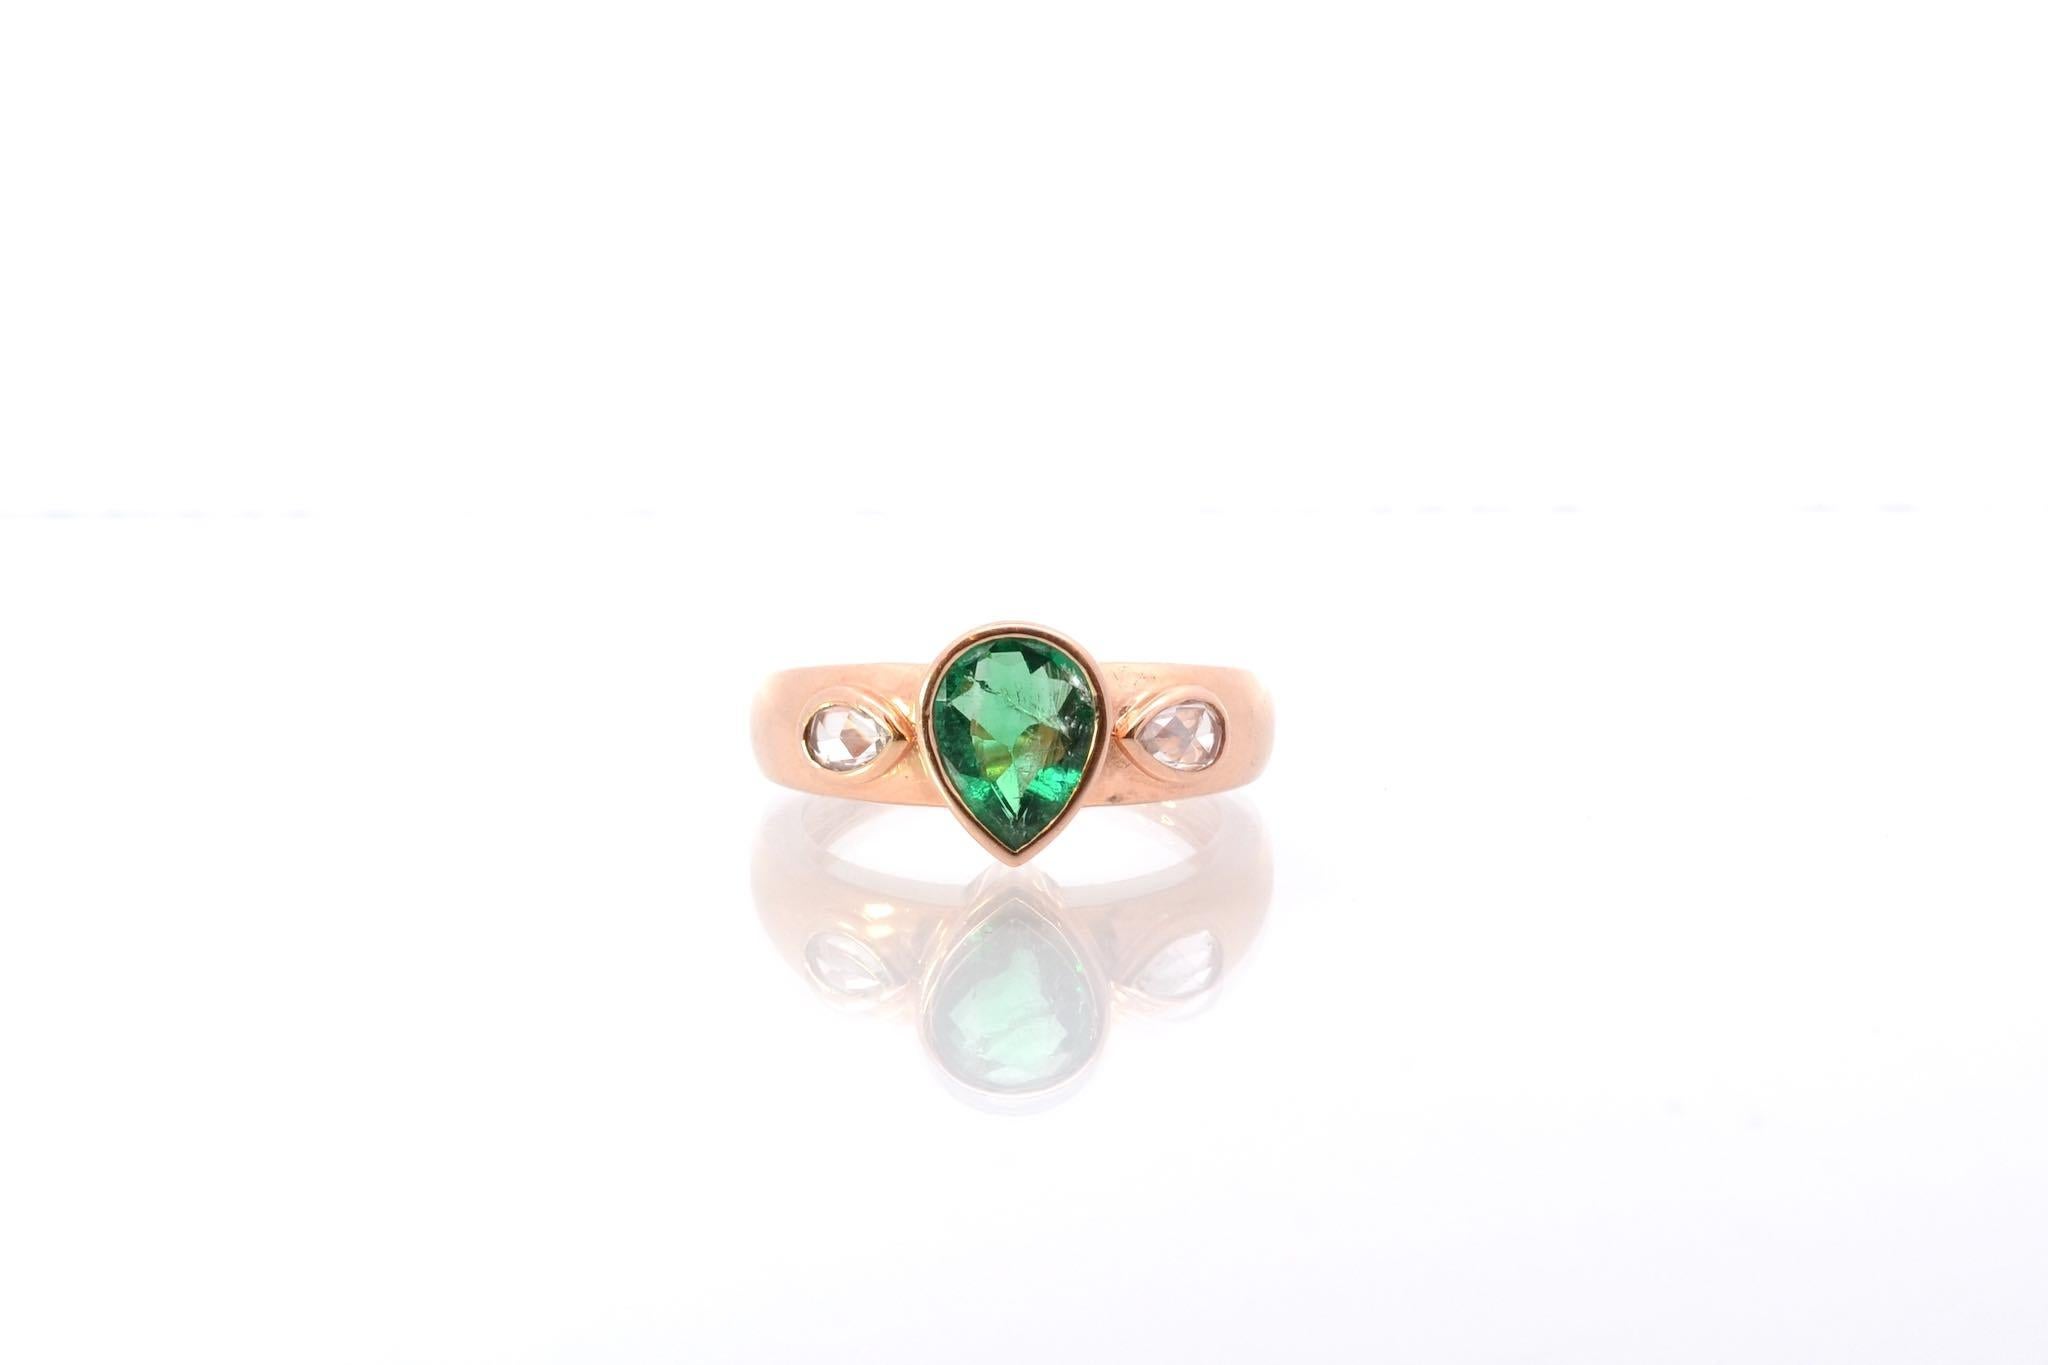 Stones: Pear emerald: 1.40 cts and 2 pear rose diamonds: 0.18 ct.
Material: 18k rose gold
Dimensions: 1cm
Weight: 5.2g
Period: 1980
Size: 54 (free sizing)
Certificate
Ref. : 25523